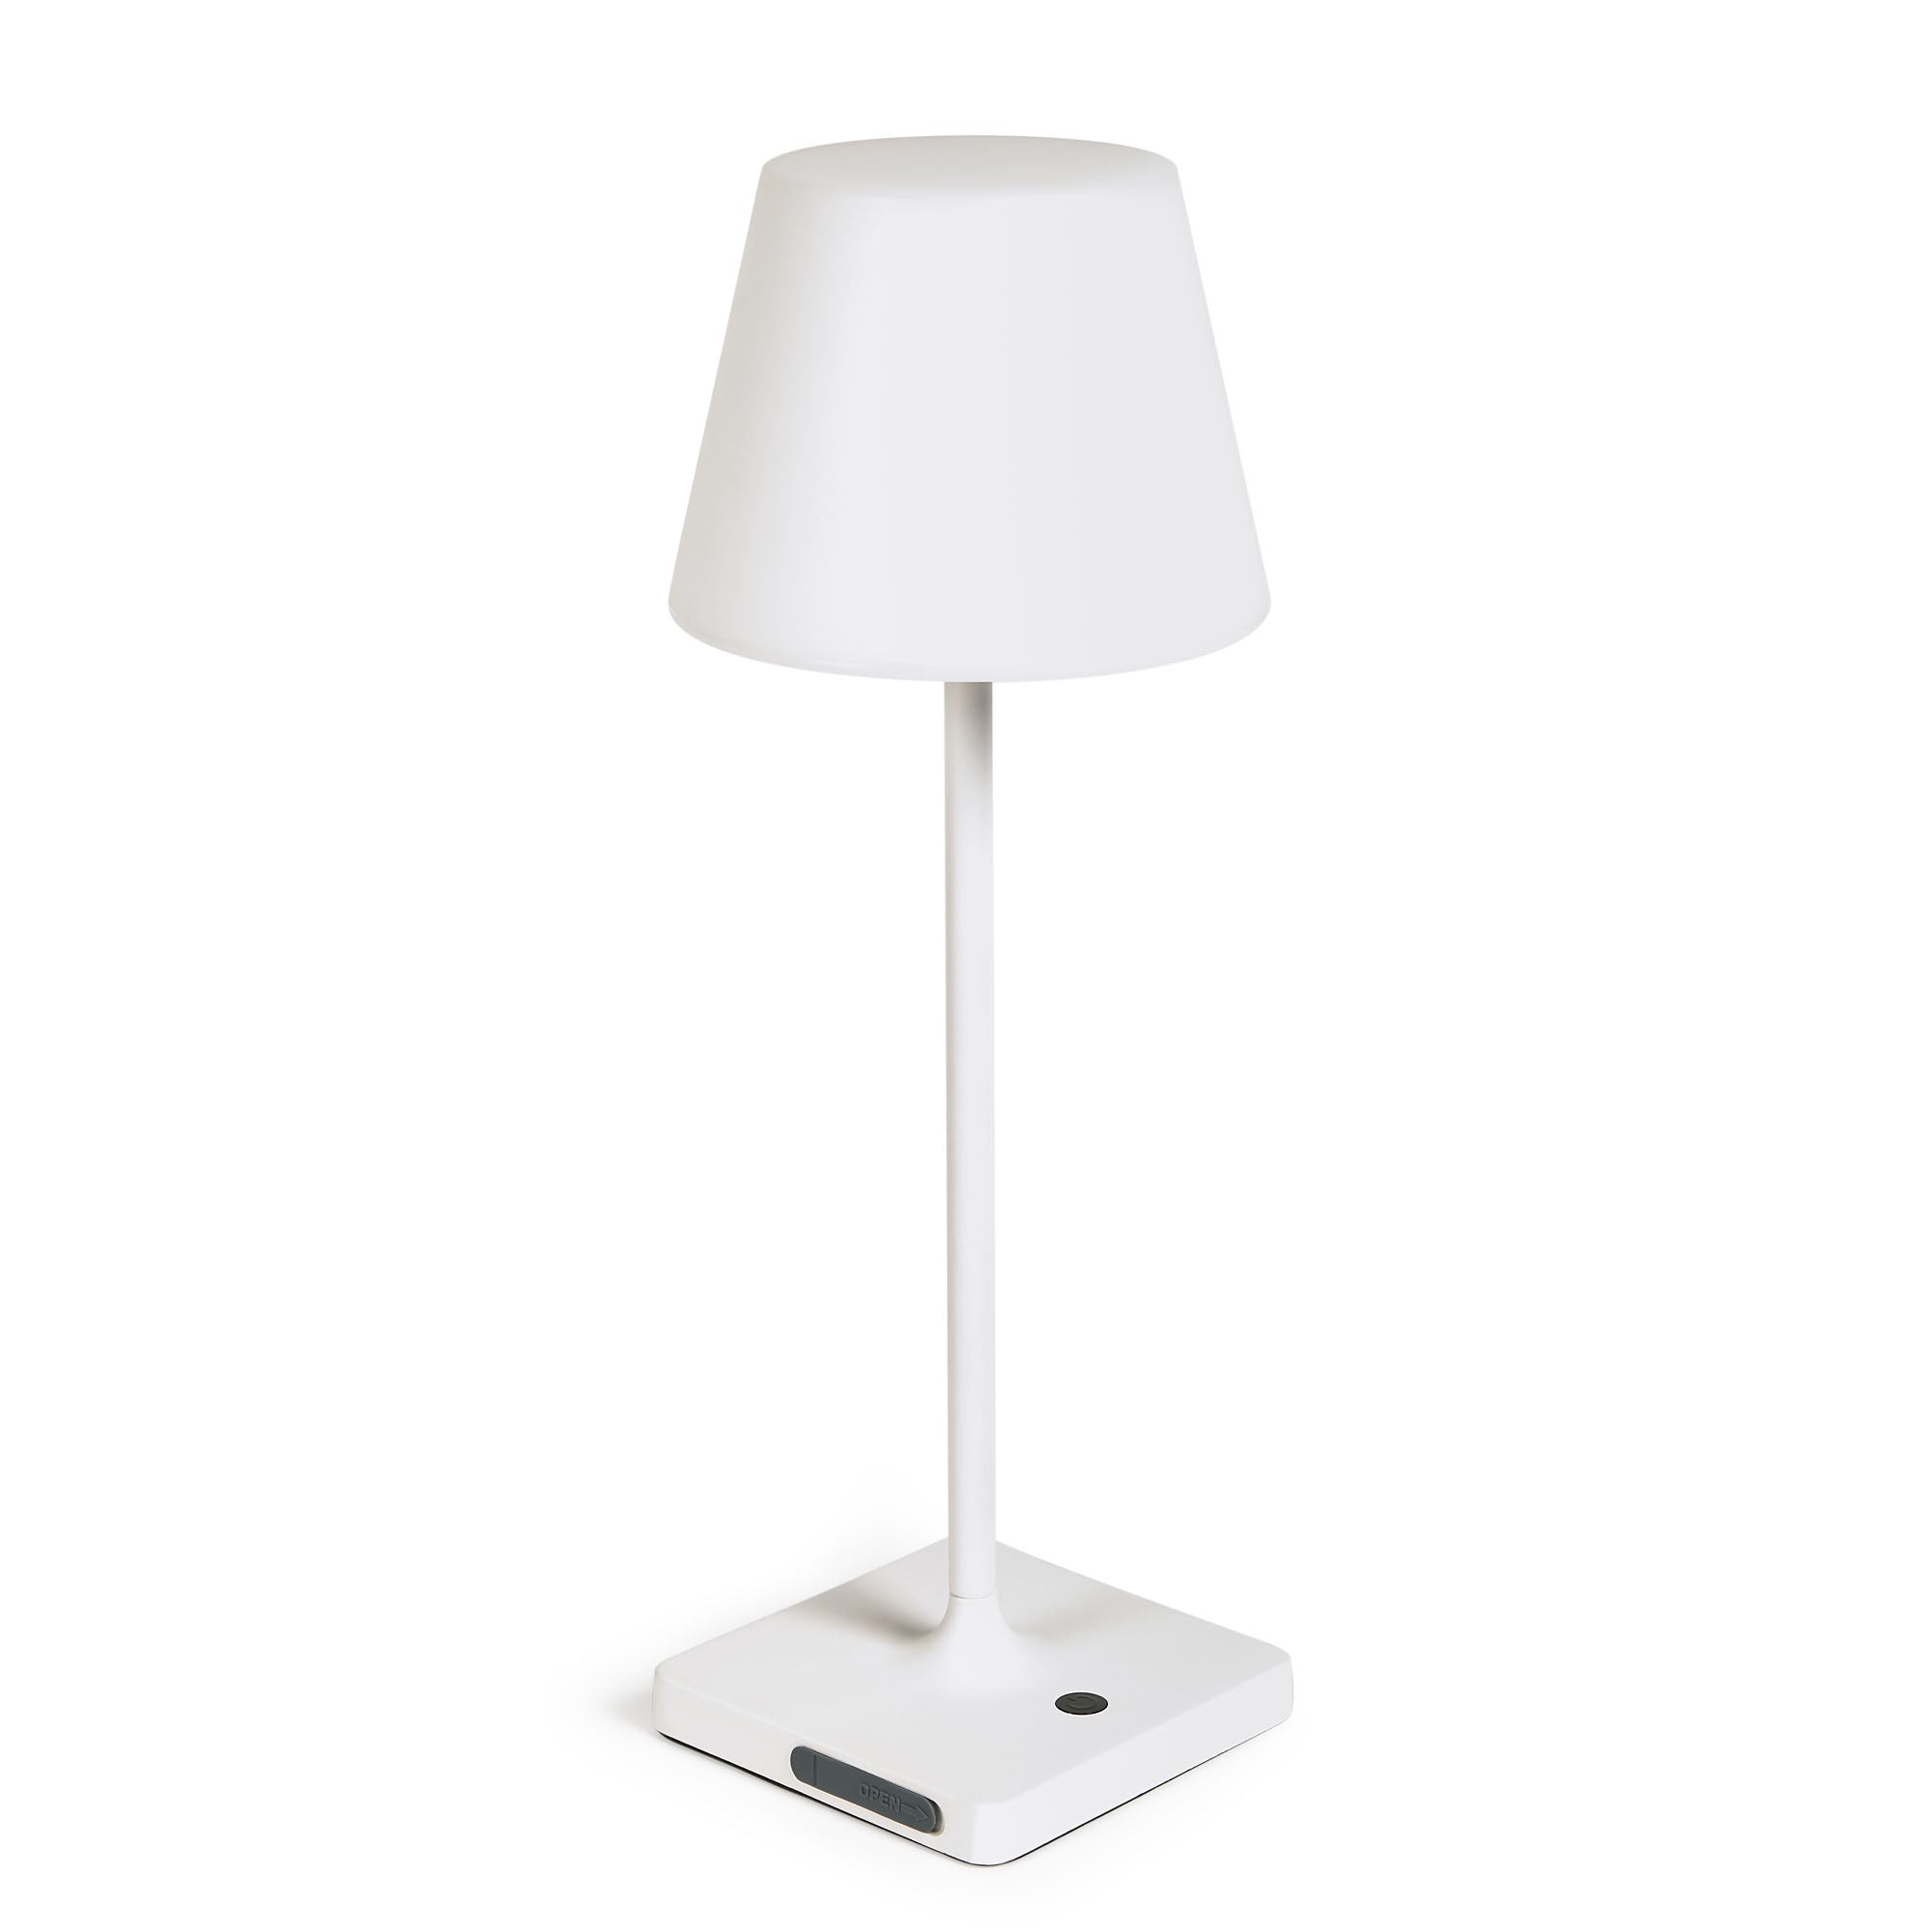 Outdoor Aluney table lamp in white finish